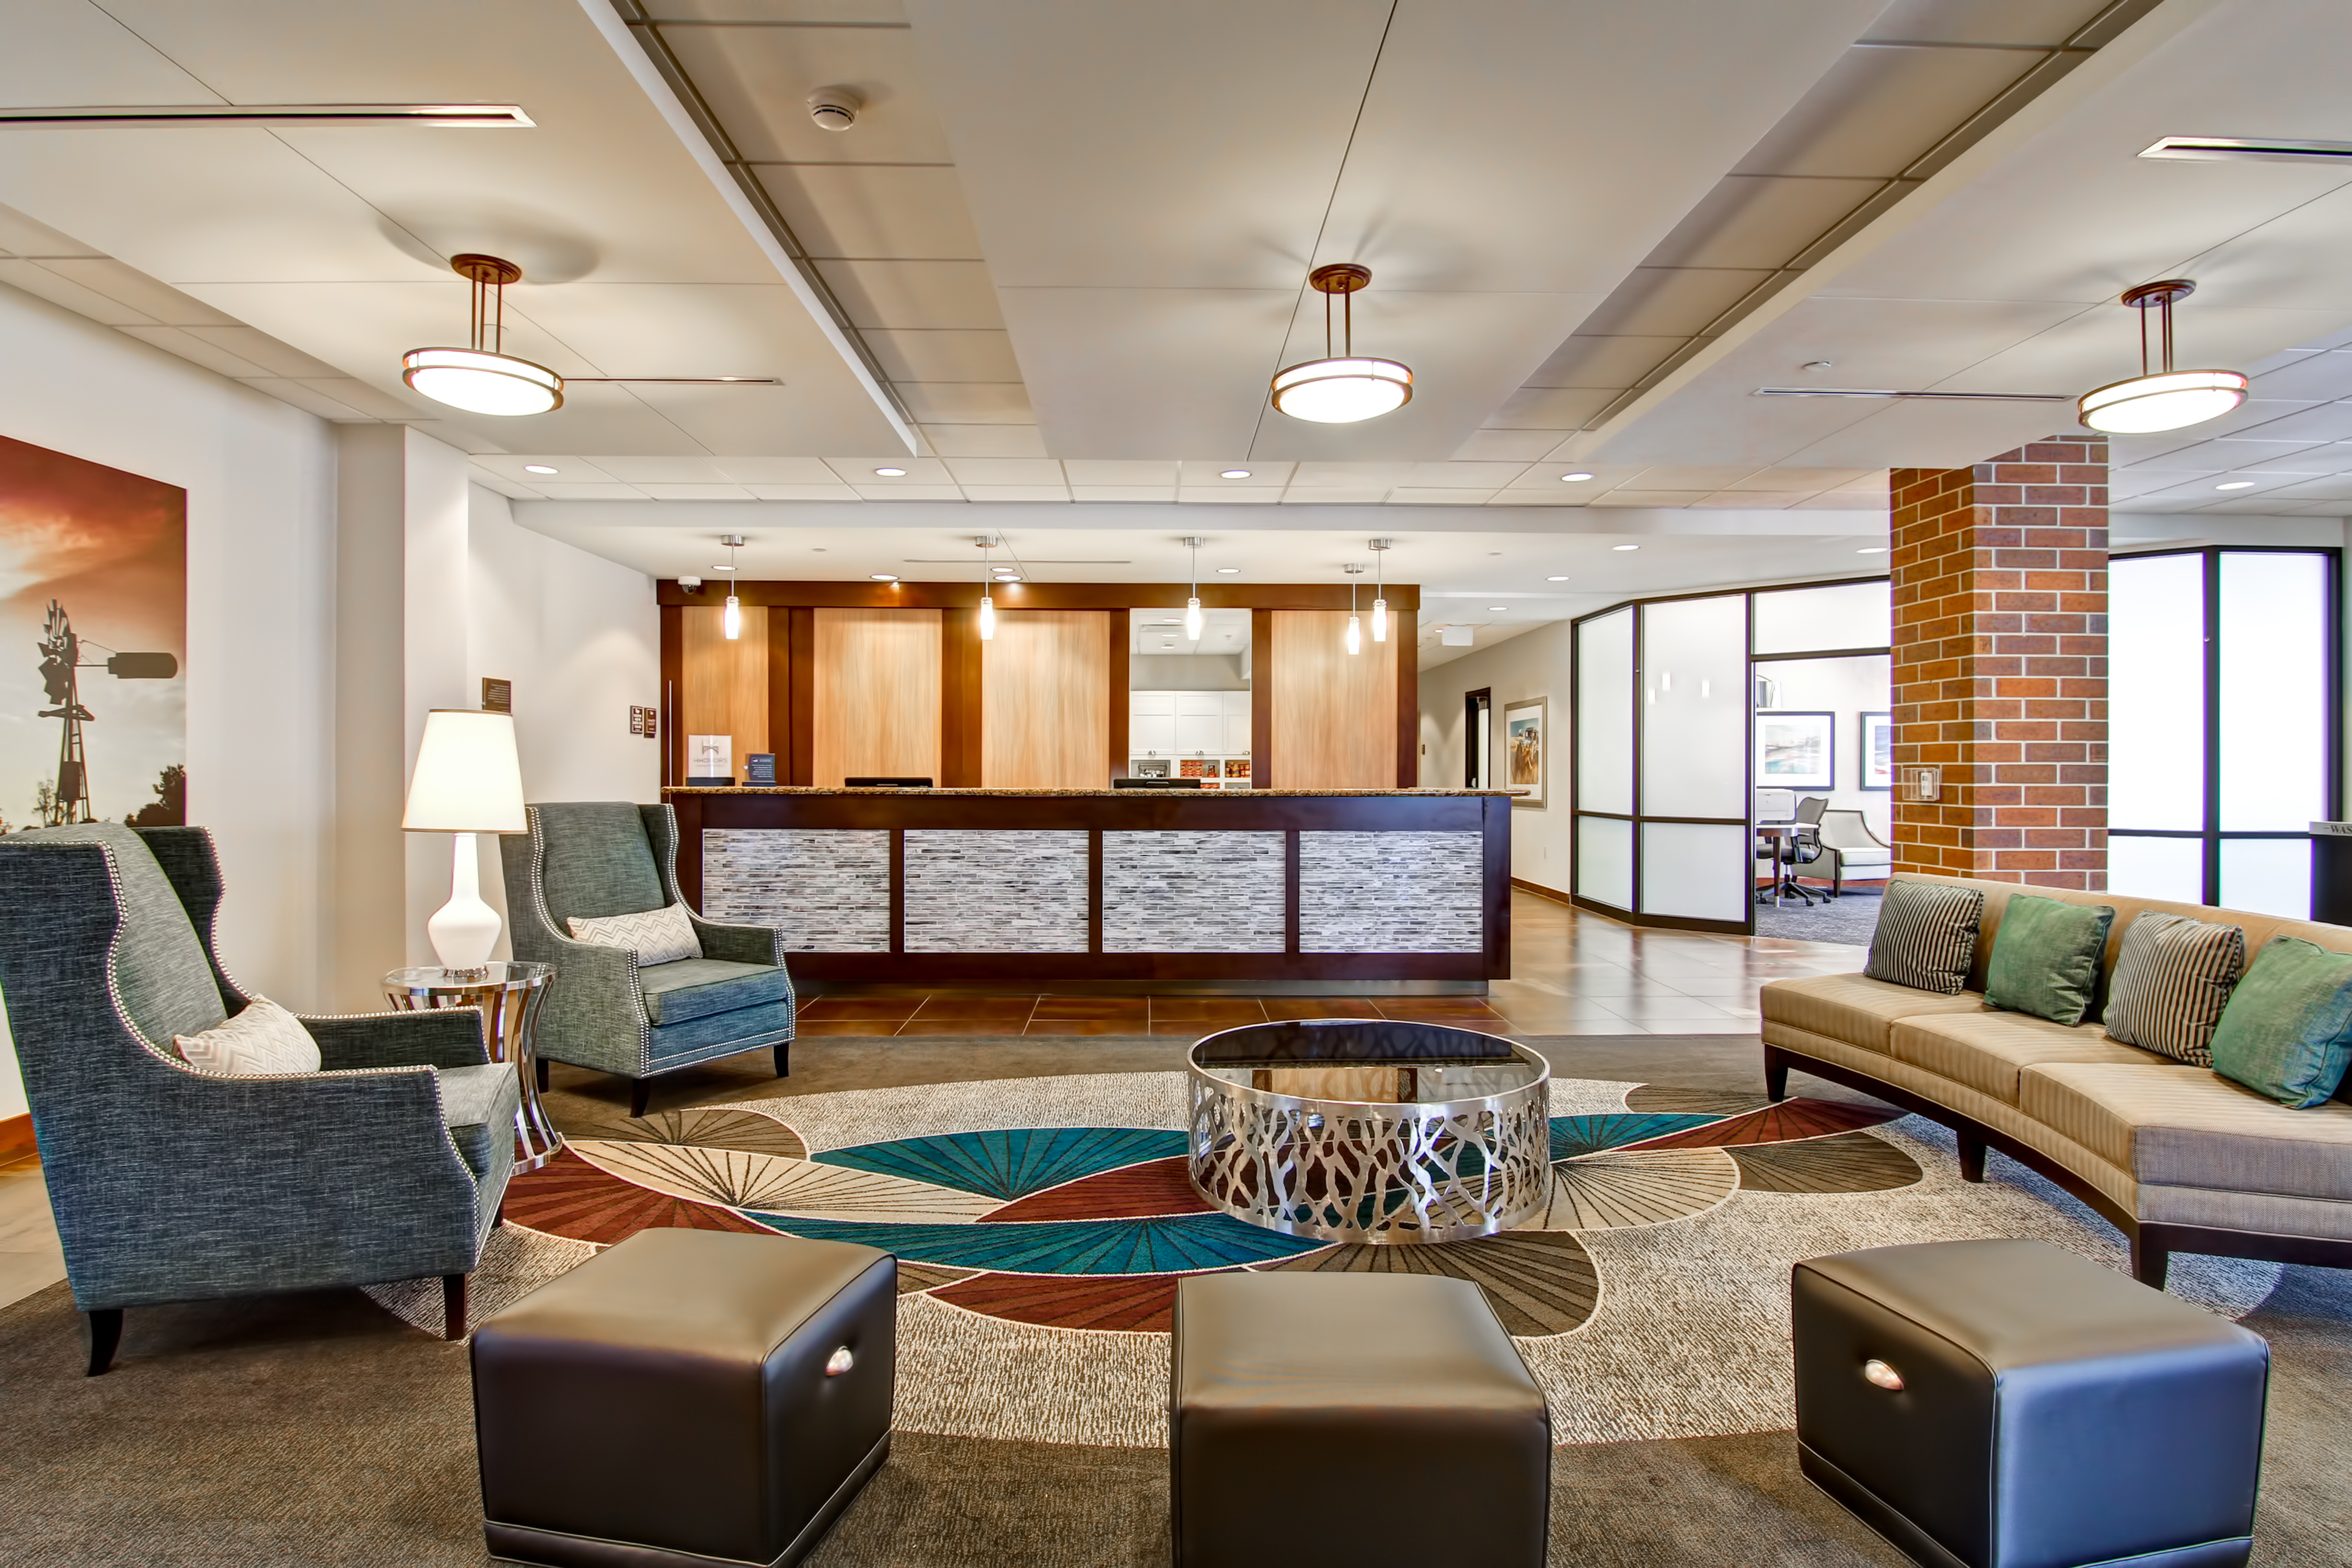 Lobby Seating Area With Ottomans, Arm Chairs, Wall Art, Sofa, Table, and Views of Front Desk and Business Center